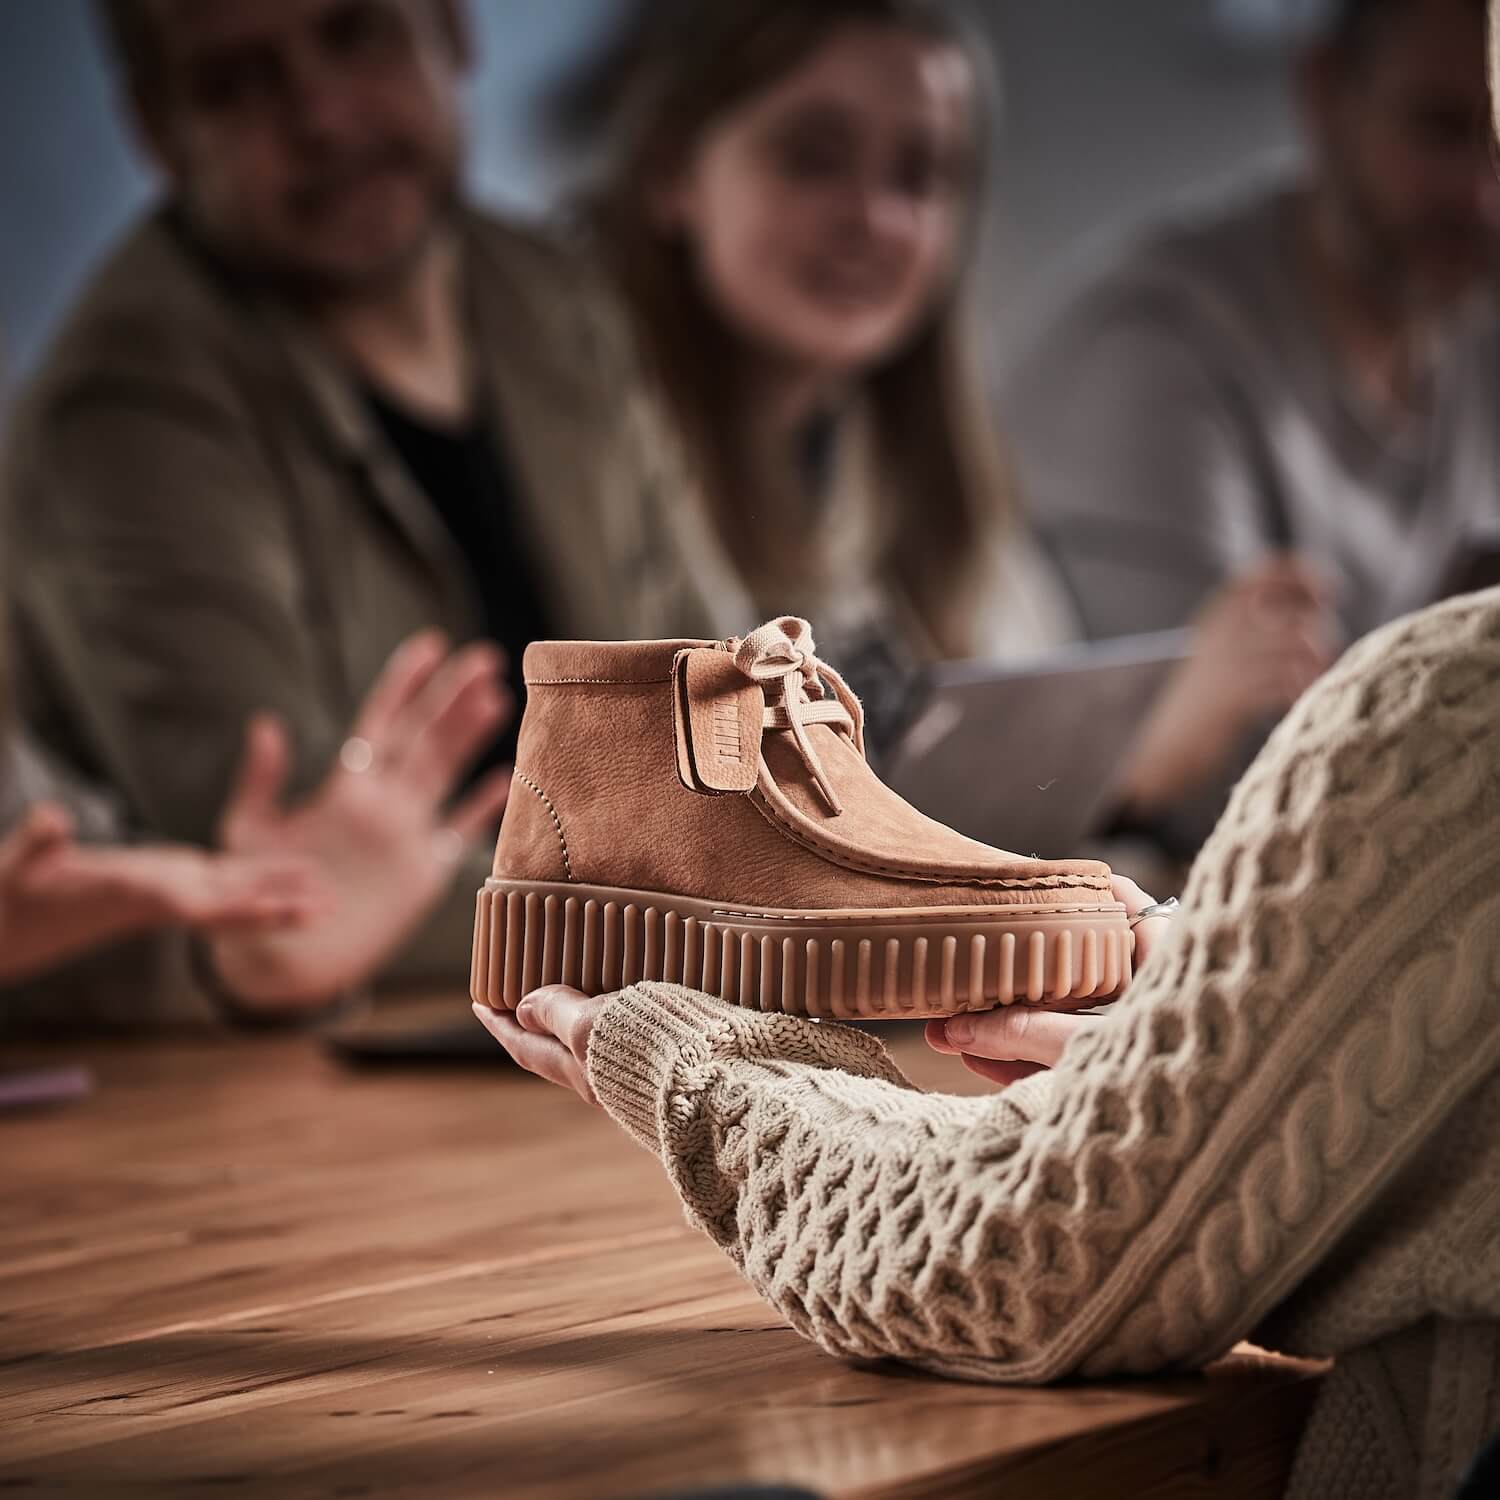 Clarks Jobs - Careers Website - Working With Product - Additional Image 1.jpg